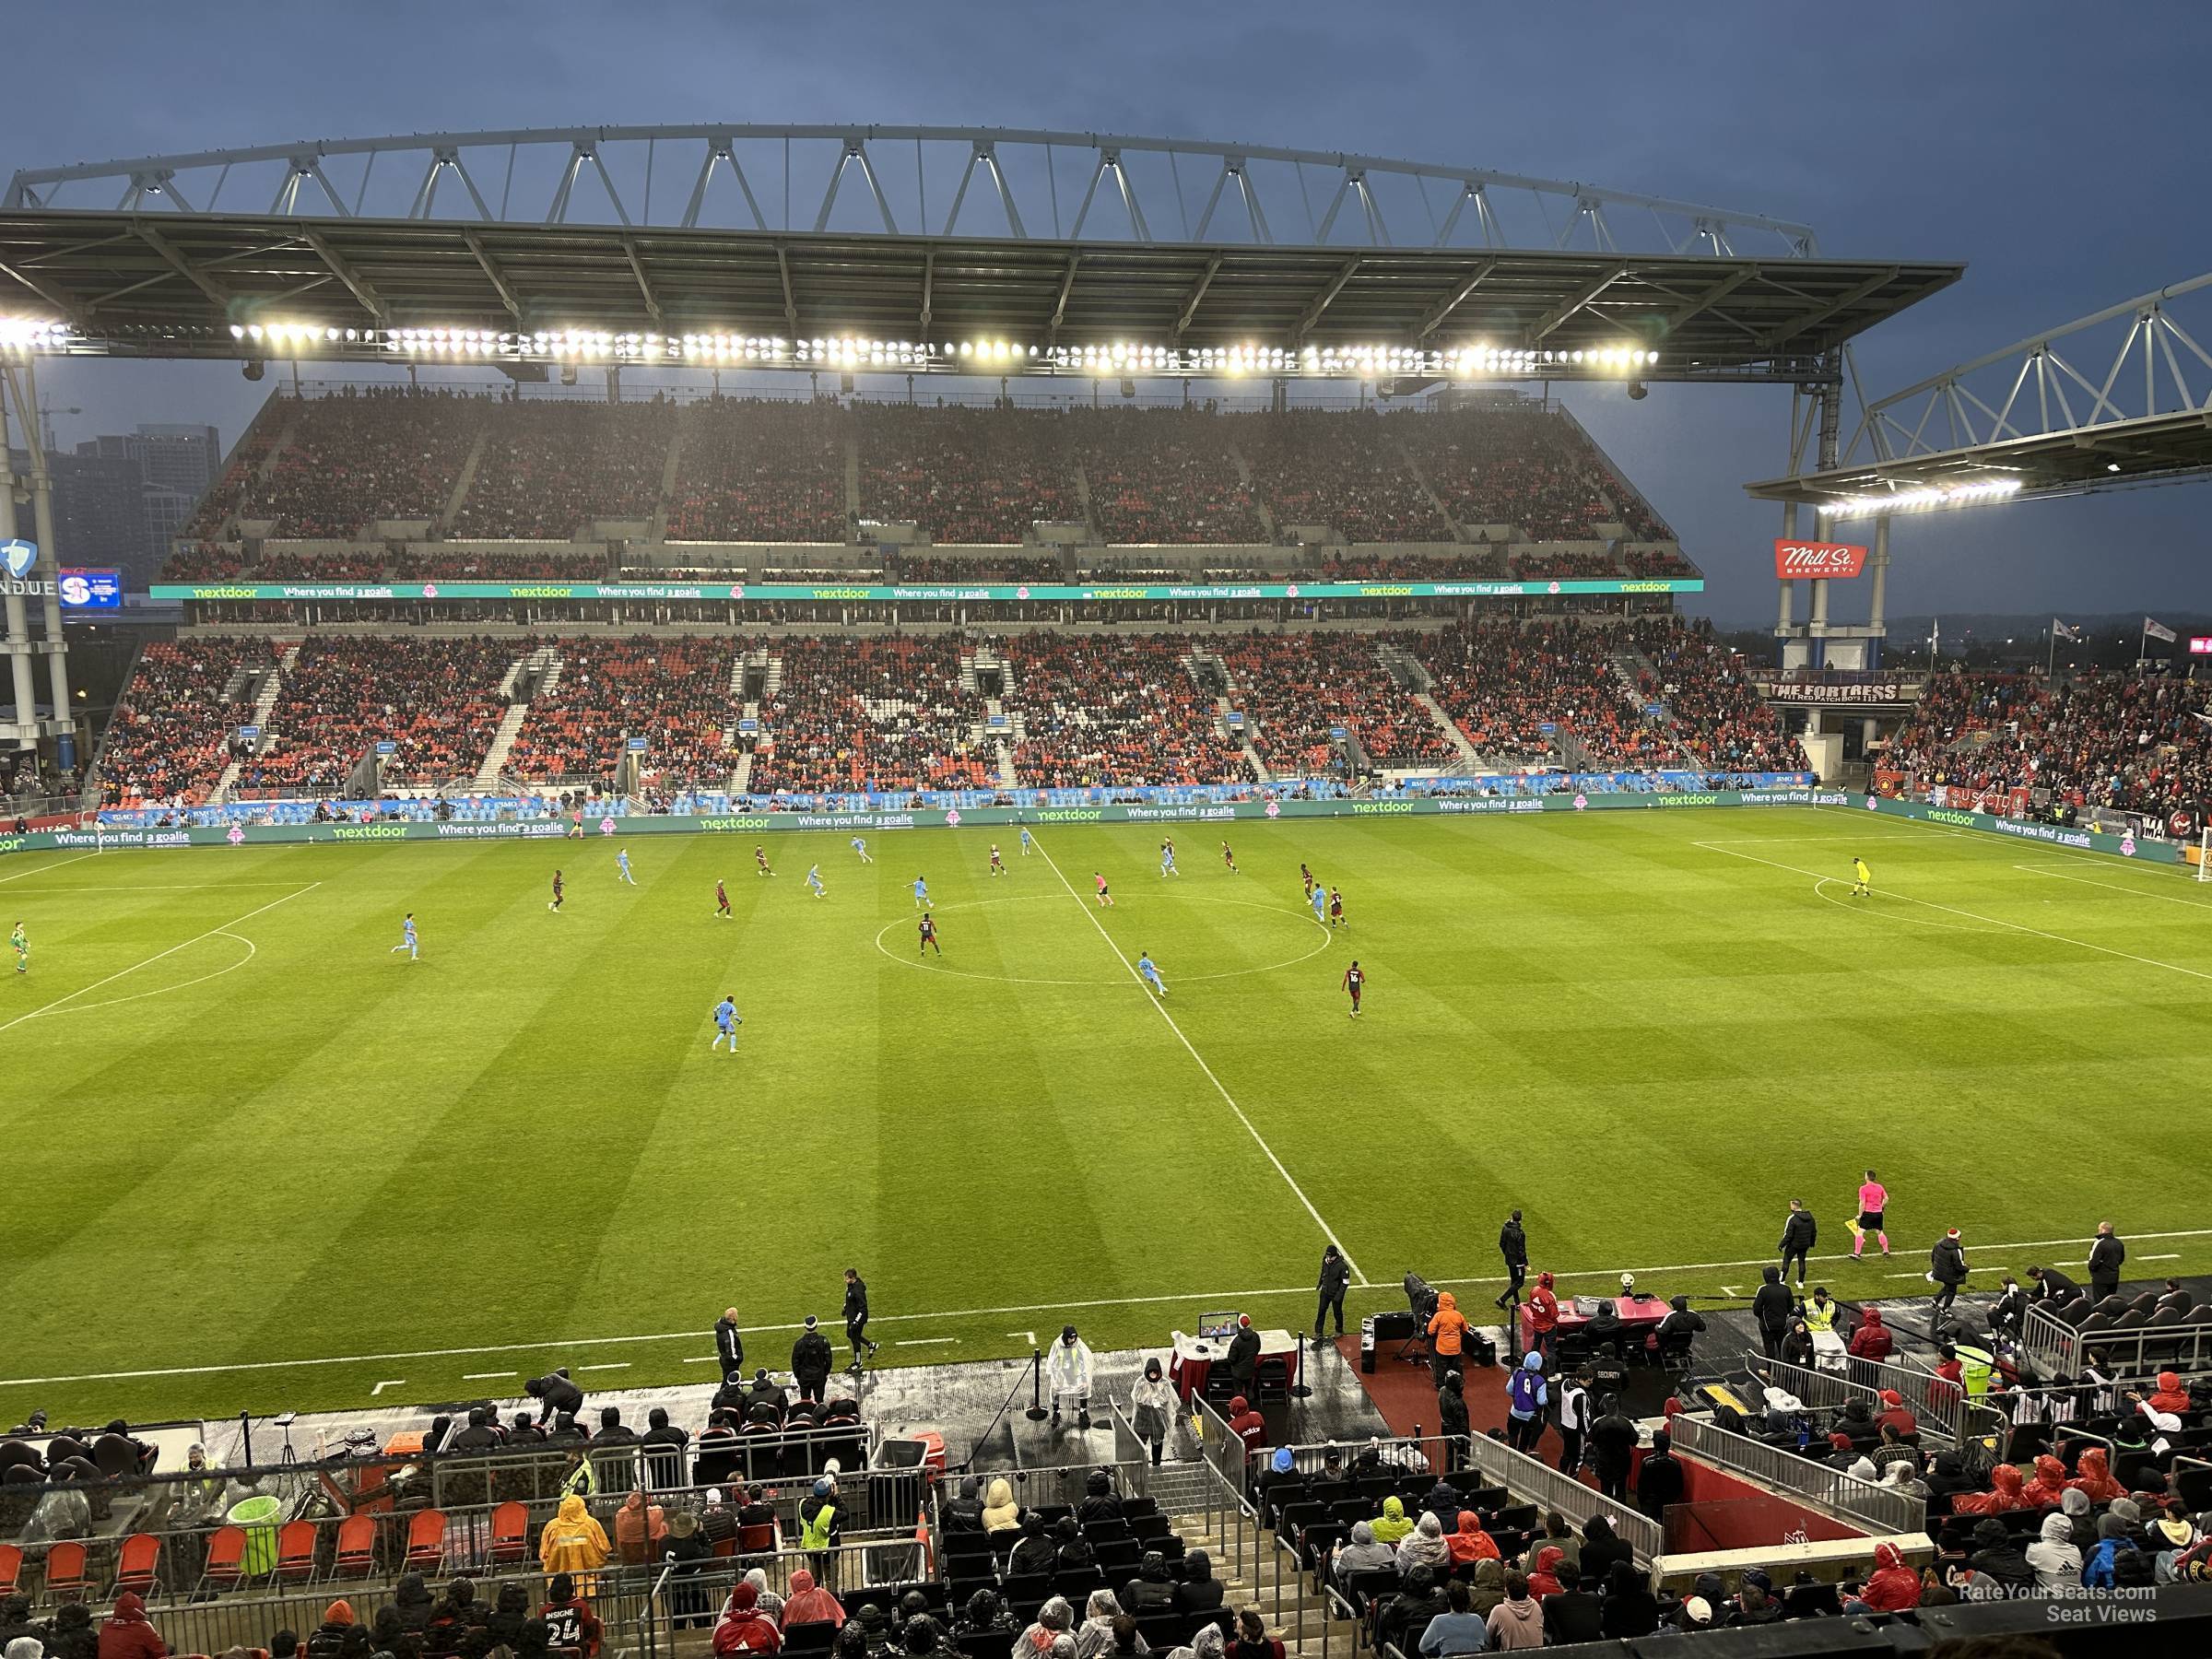 section 223, row 2 seat view  - bmo field